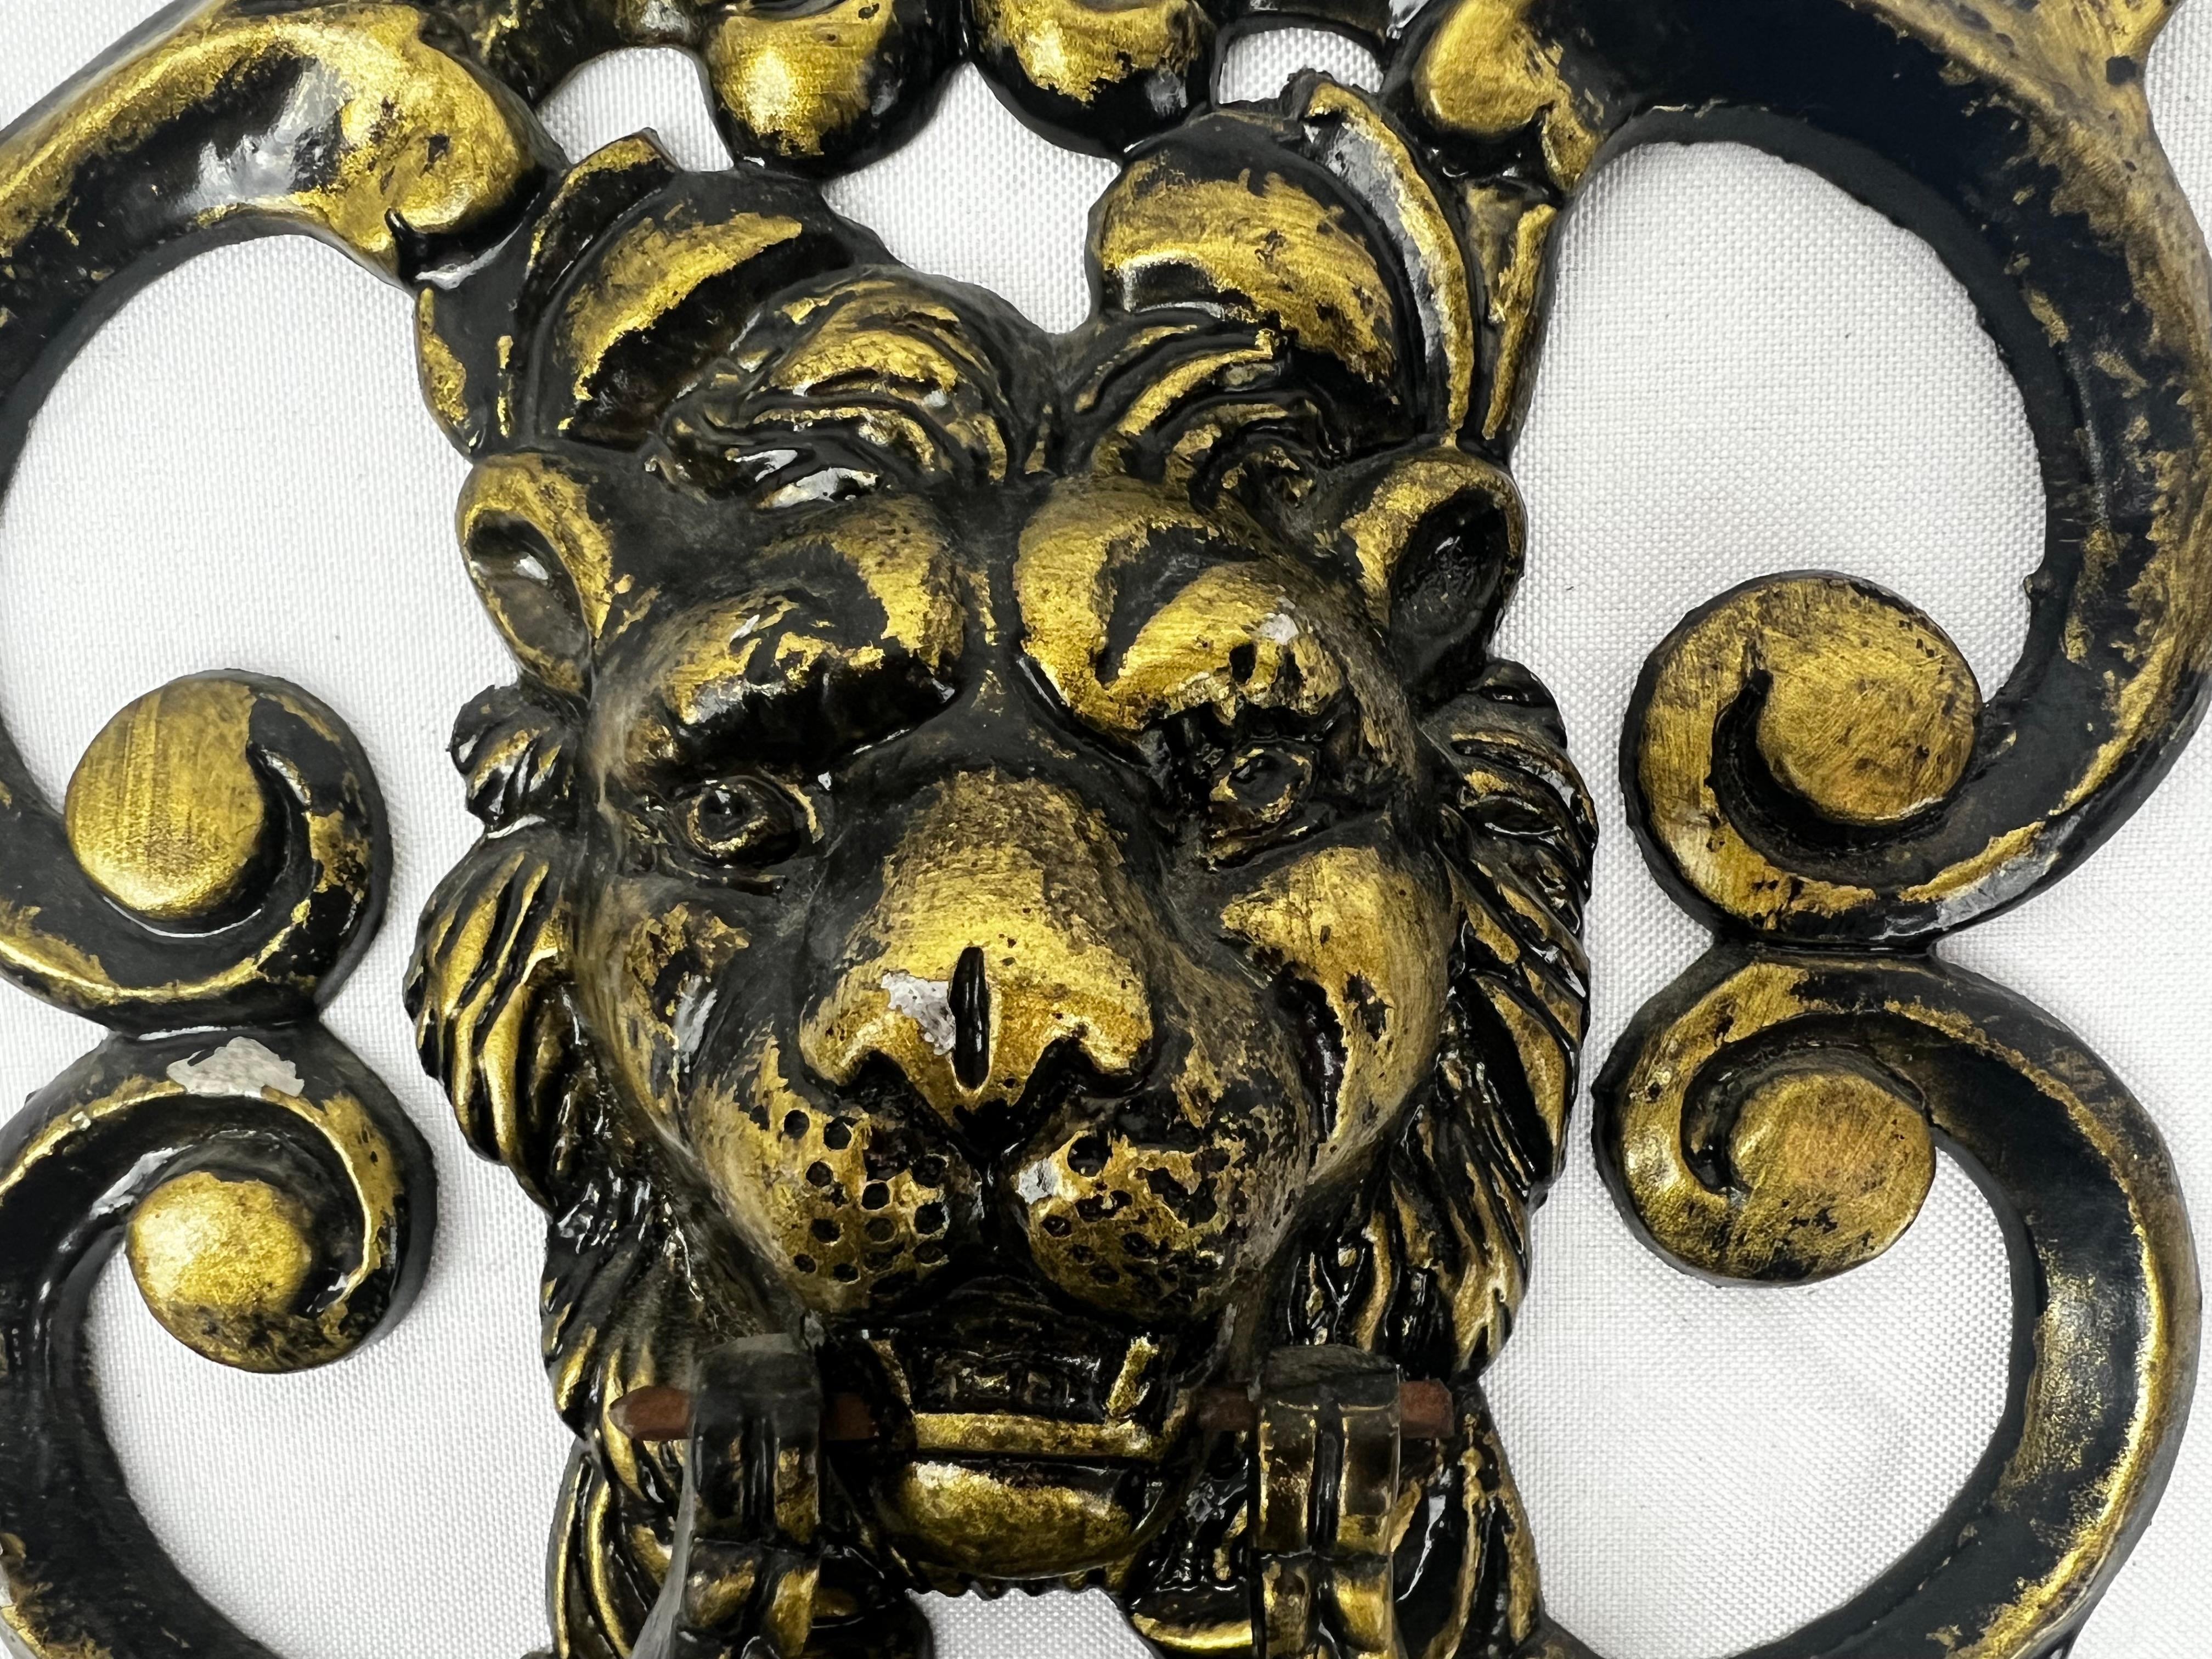 This ferocious large classical lion door knocker has been saved from a pre-eminent building in Palm Beach. The knocker is attached at either side of the mouth and is operational. There are foliate scrolls surrounding the lion's face. It has been